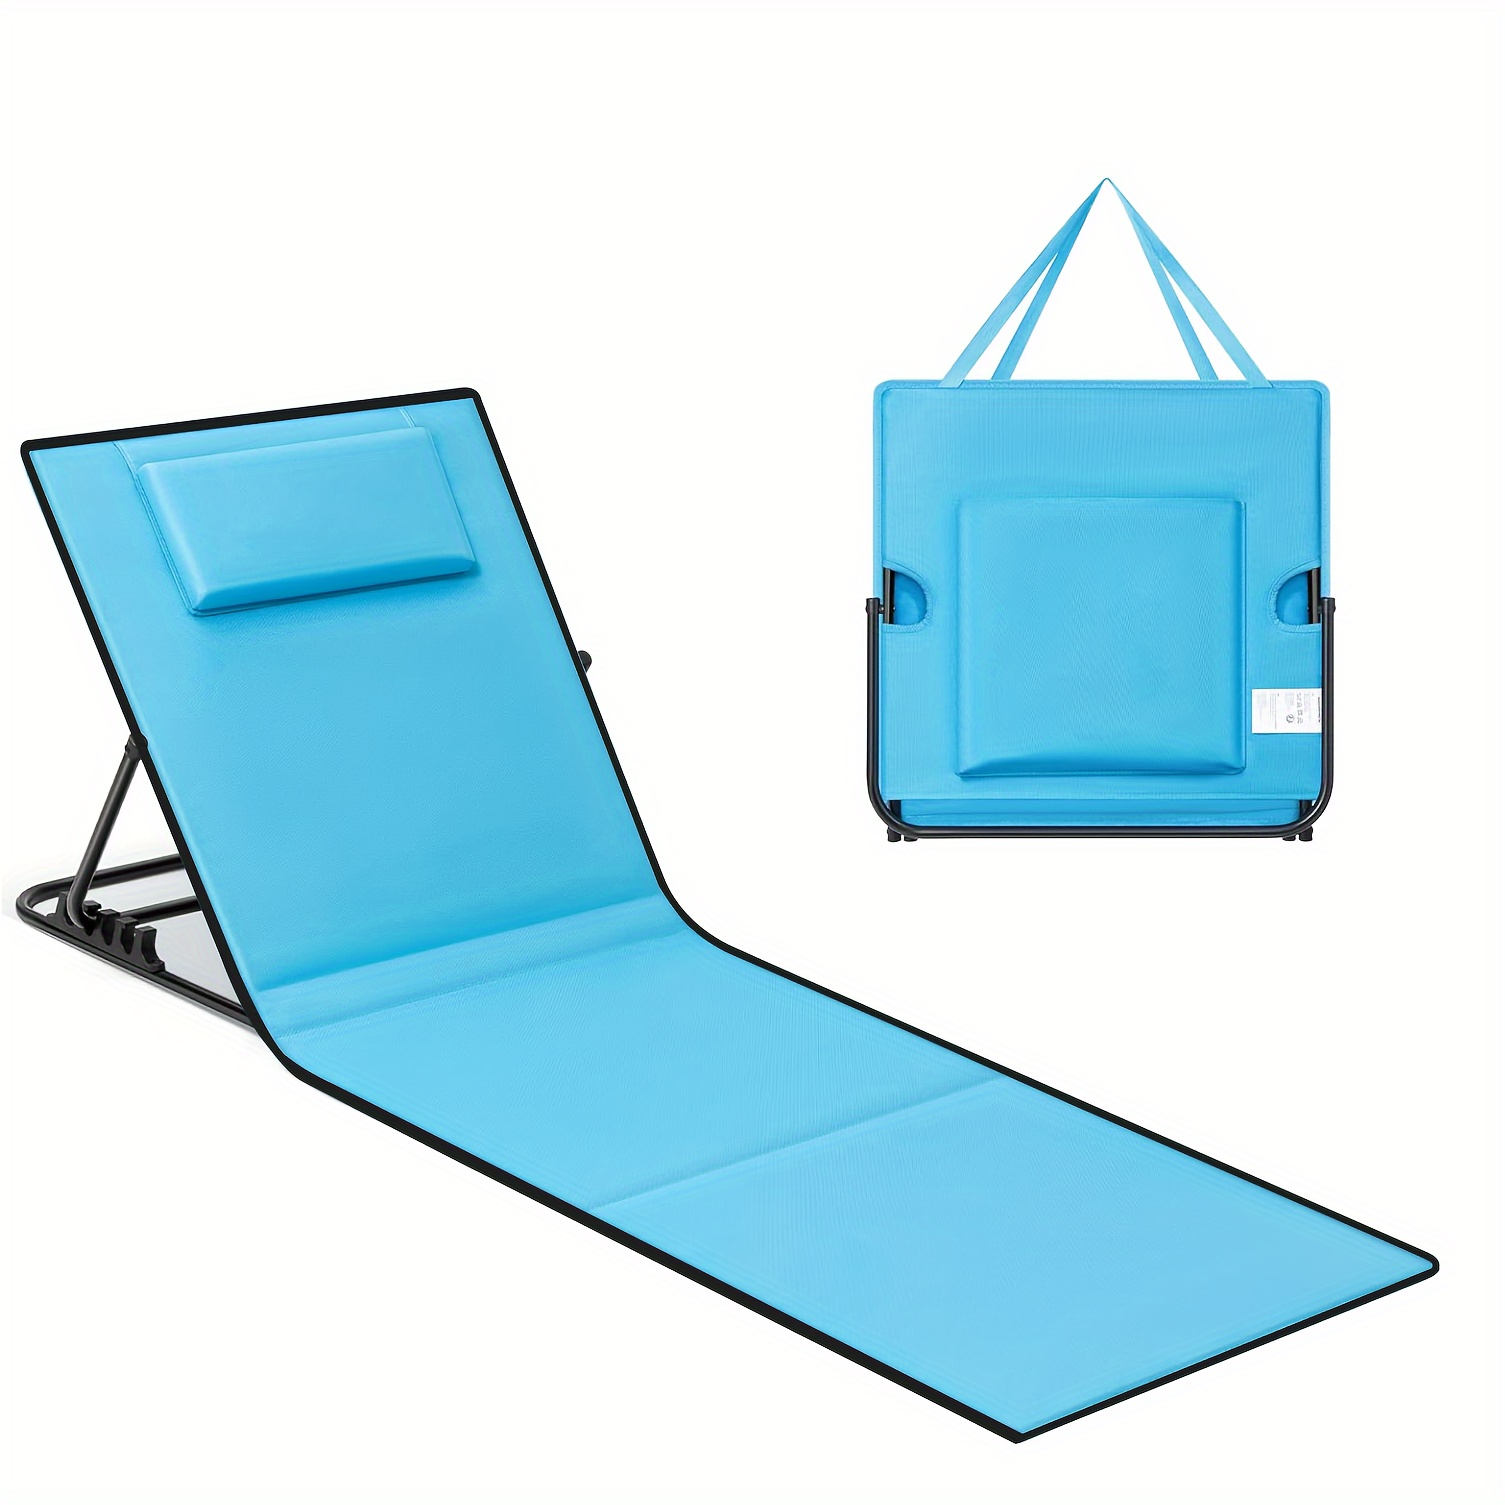 

Ultra-comfort Folding Beach Chair With Reclining Backrest - Lightweight, Portable & Durable Steel Frame For Pool, Garden, Camping